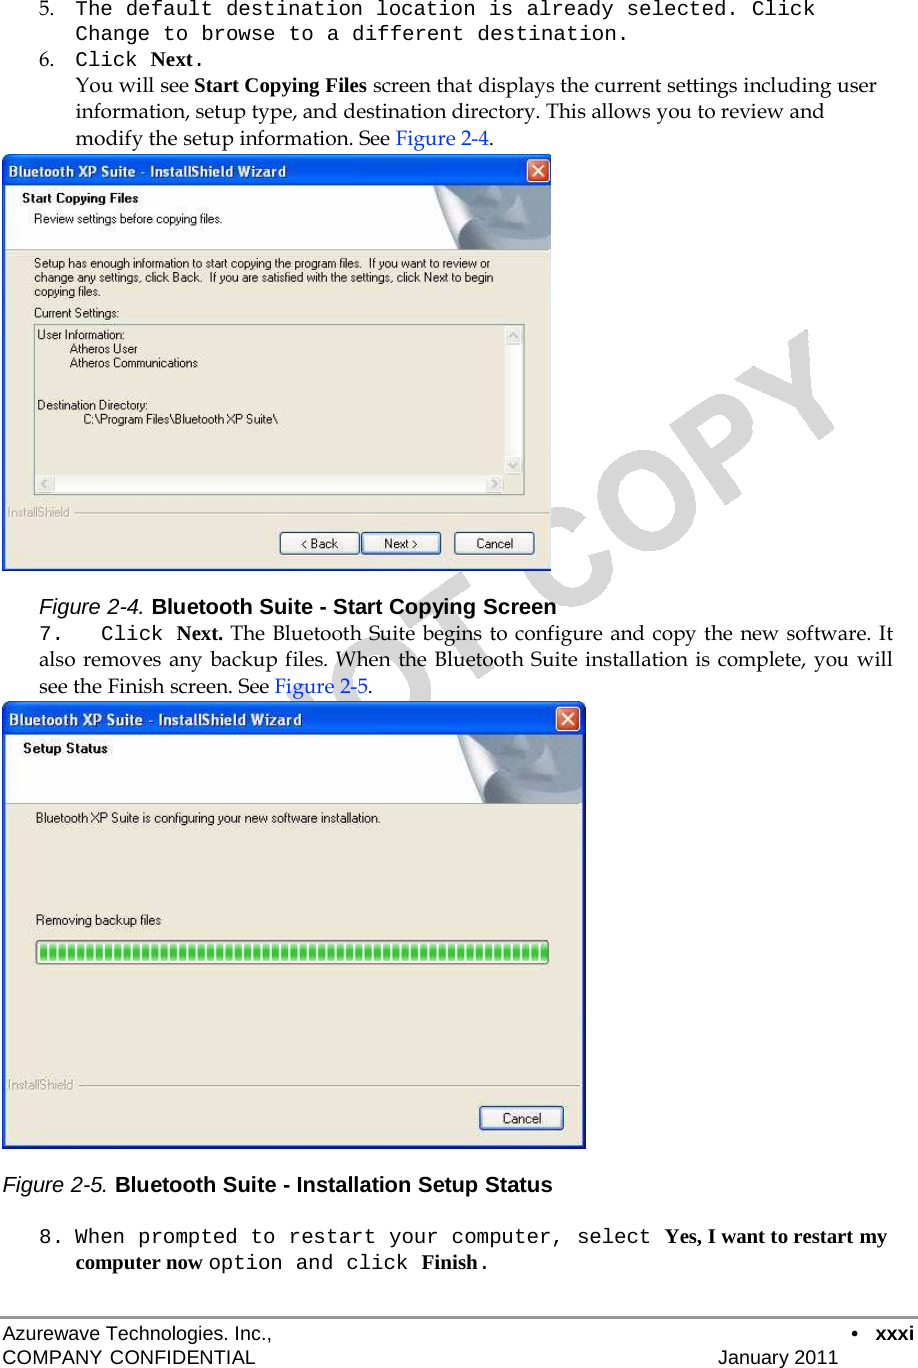 5.    The default destination location is already selected. Click Change to browse to a different destination. 6.    Click Next. You will see Start Copying Files screen that displays the current settings including user information, setup type, and destination directory. This allows you to review and modify the setup information. See Figure 2-4.                      Figure 2-4. Bluetooth Suite - Start Copying Screen 7.  Click Next. The Bluetooth Suite begins to configure and copy the new software. It also removes any backup files. When the Bluetooth Suite installation is complete, you will see the Finish screen. See Figure 2-5.                       Figure 2-5. Bluetooth Suite - Installation Setup Status  8. When prompted to restart your computer, select Yes, I want to restart my computer now option and click Finish.   Azurewave Technologies. Inc.,  •   xxxi COMPANY CONFIDENTIAL   January 2011 